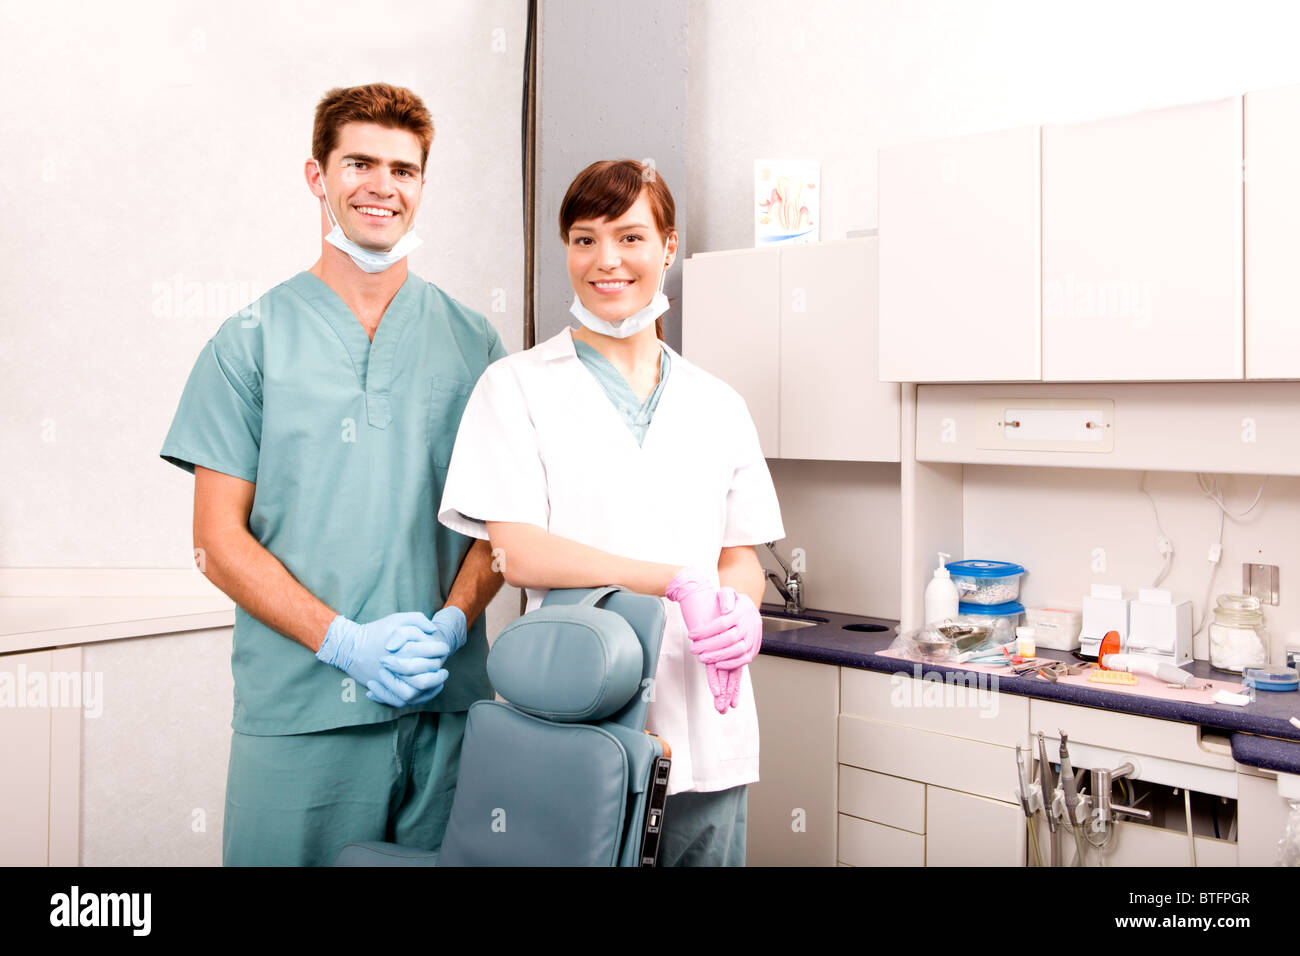 A portrait of a dentist and an assistant Stock Photo